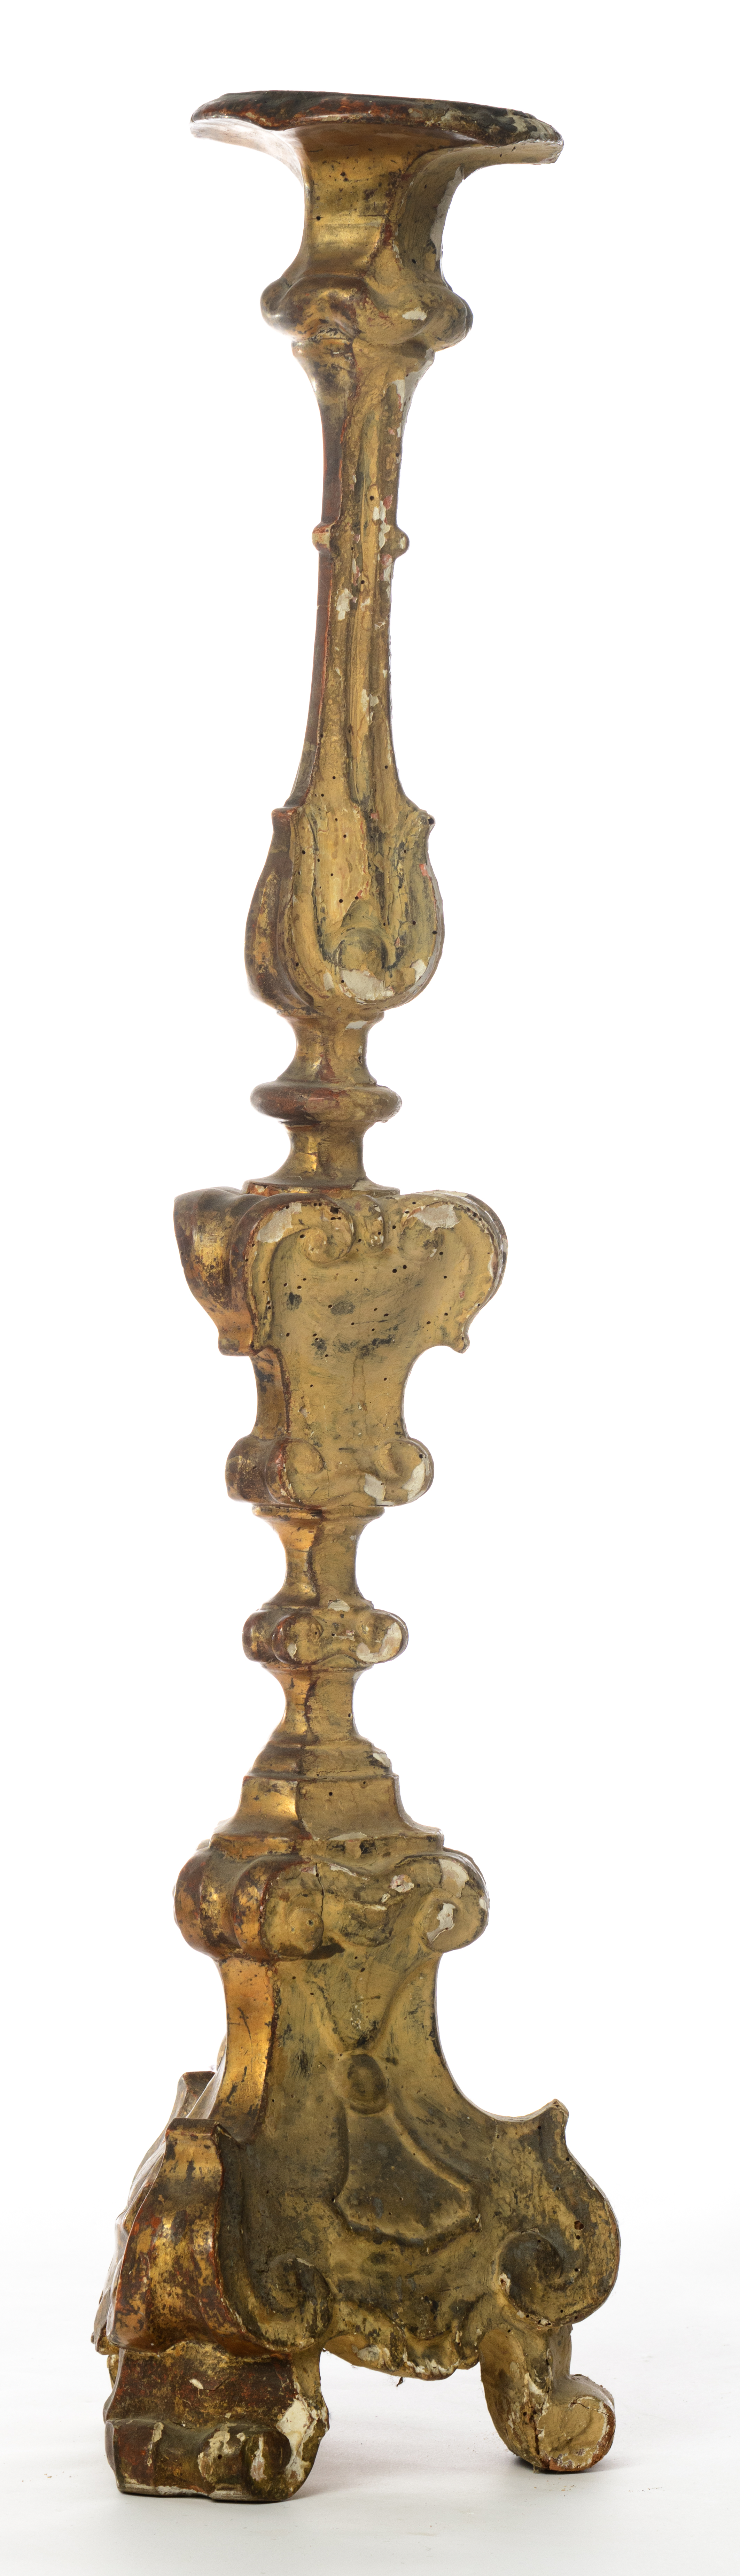 A large gilded wood Baroque altar candlestick, 18thC, H 118 cm - Image 4 of 10